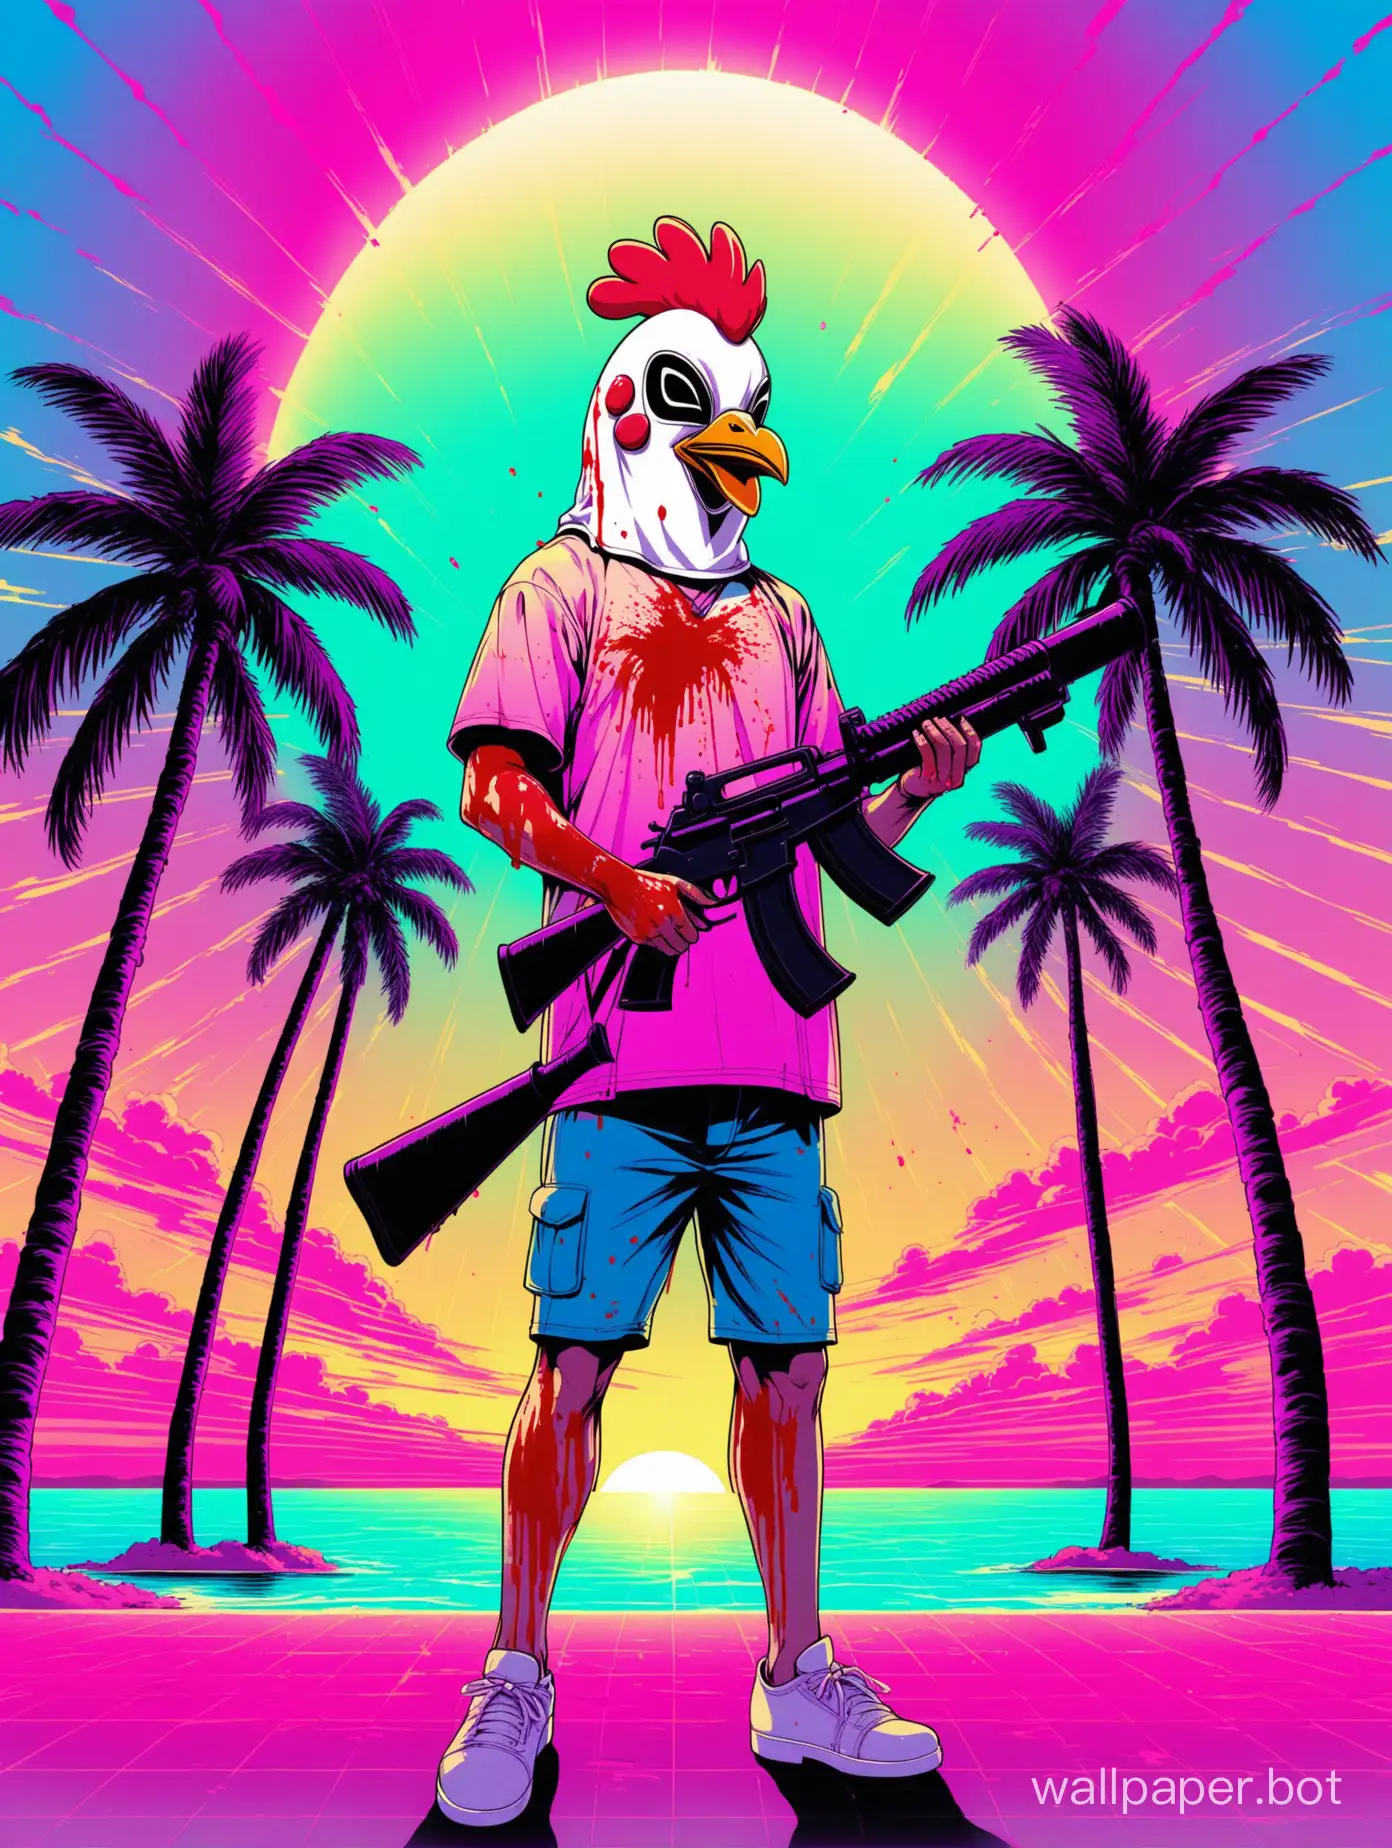 Mysterious-Figure-with-Chicken-Mask-and-Bloodied-Weapons-in-Vaporwave-Palm-Tree-Setting